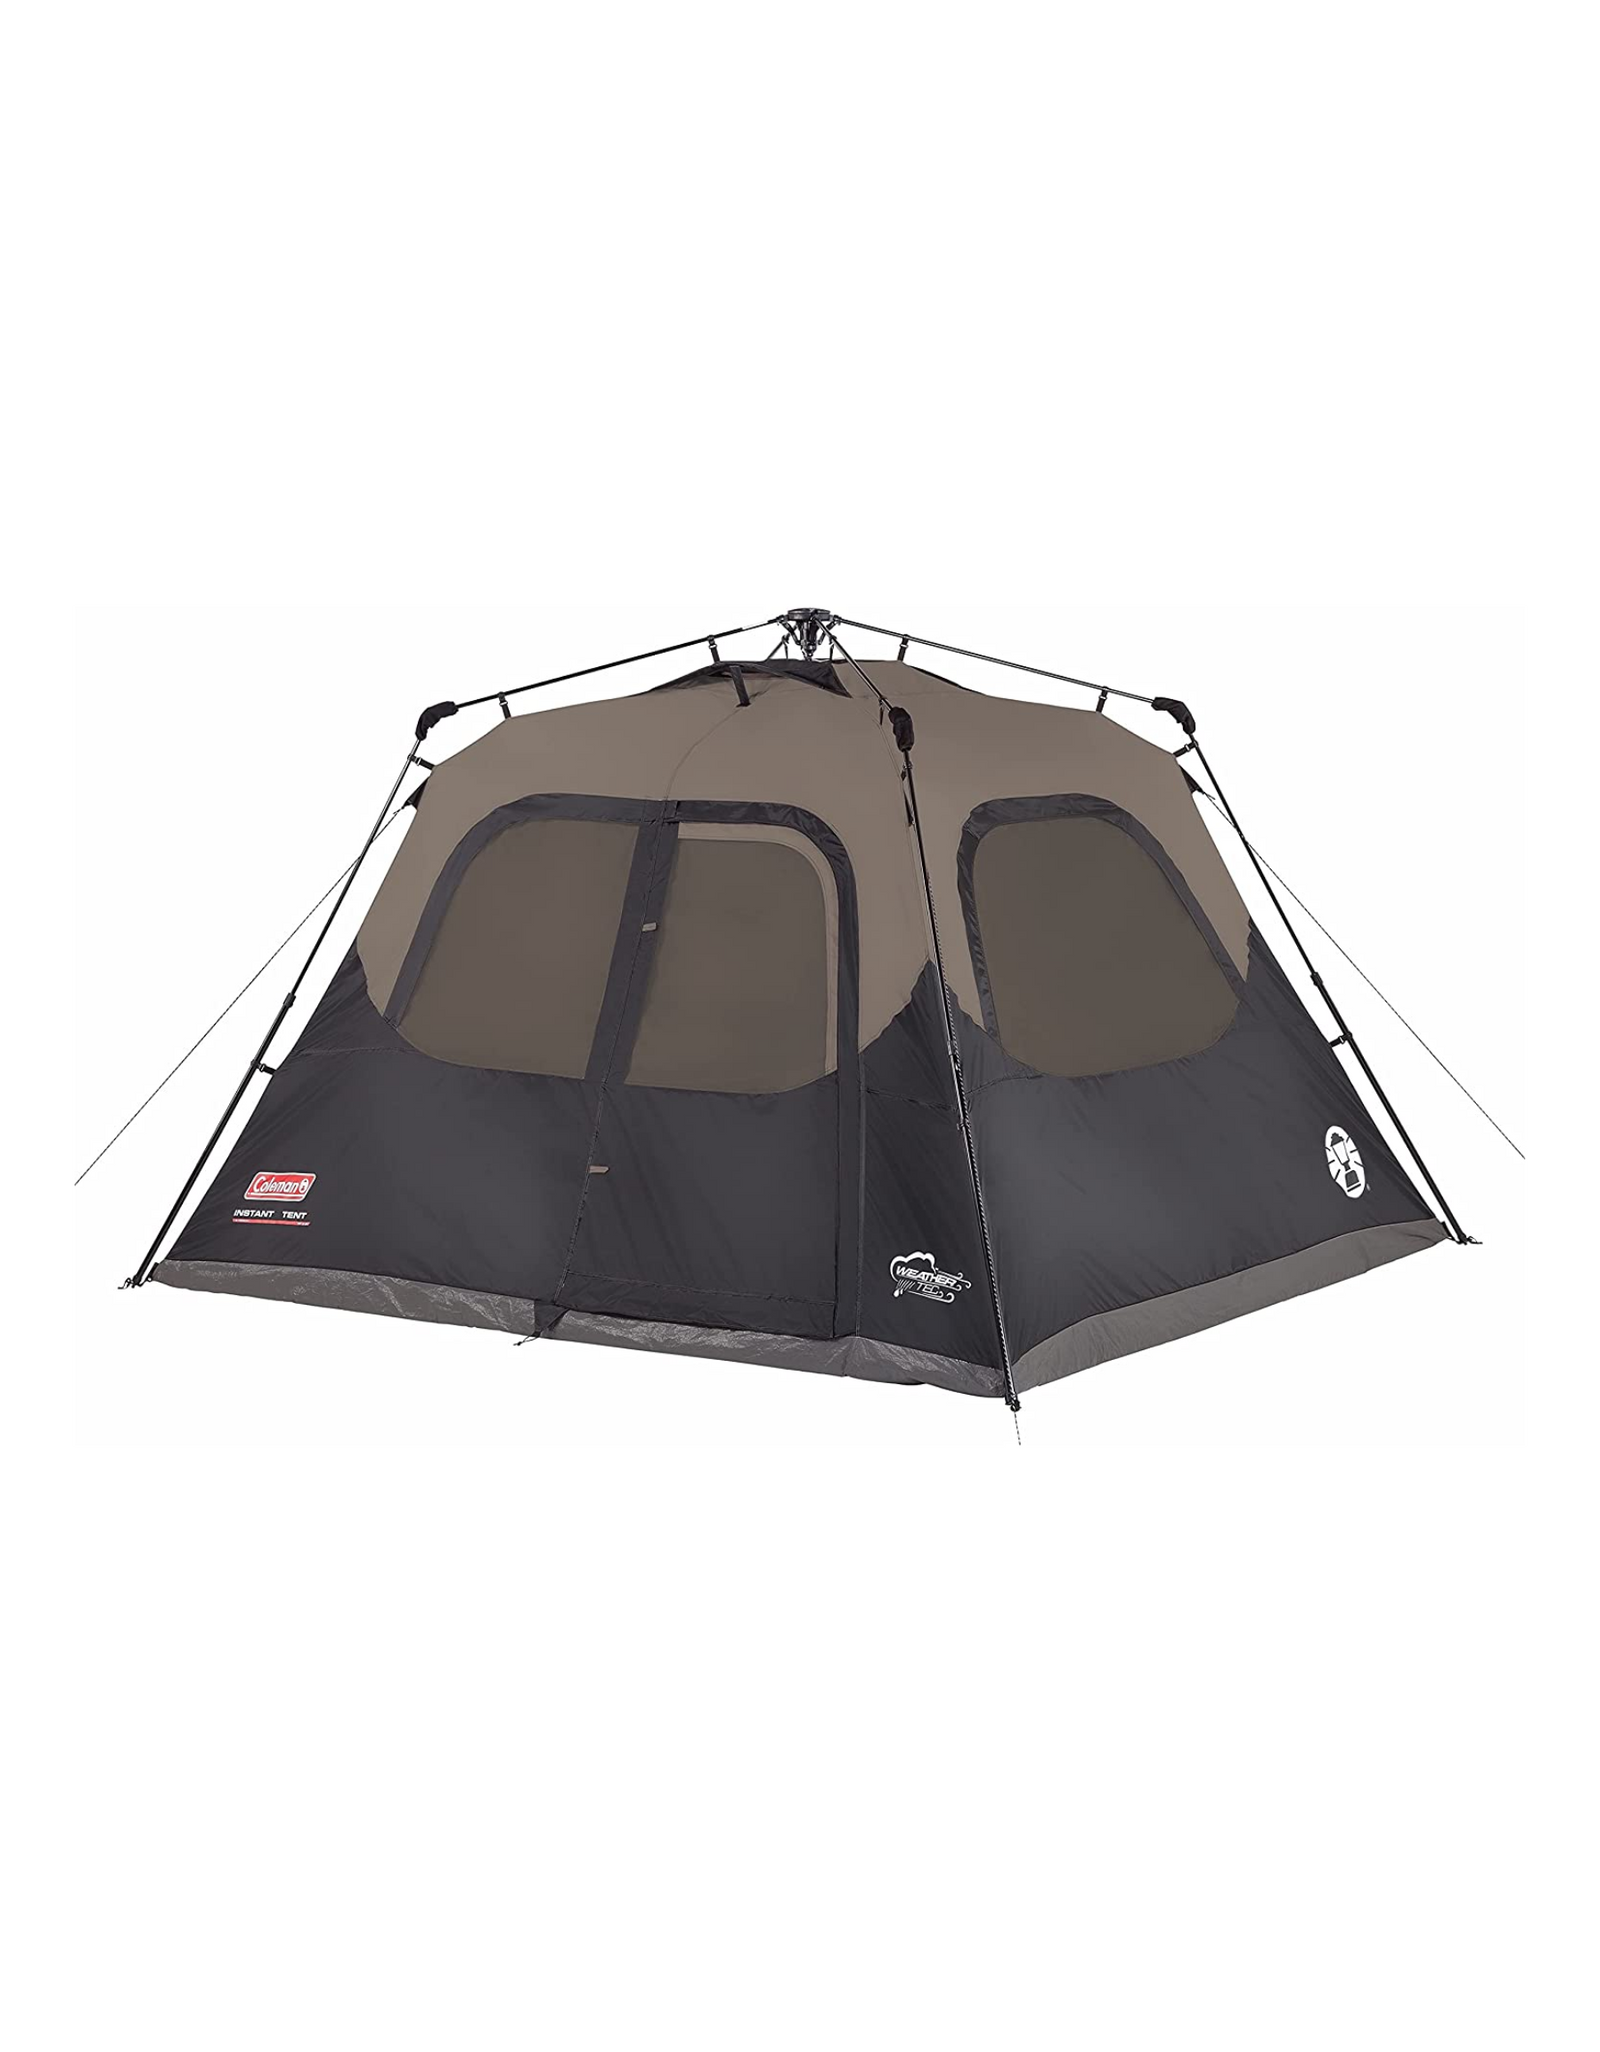 Coleman Cabin Tent with Instant Setup in 60 Seconds, 6 Person, Brown/Black